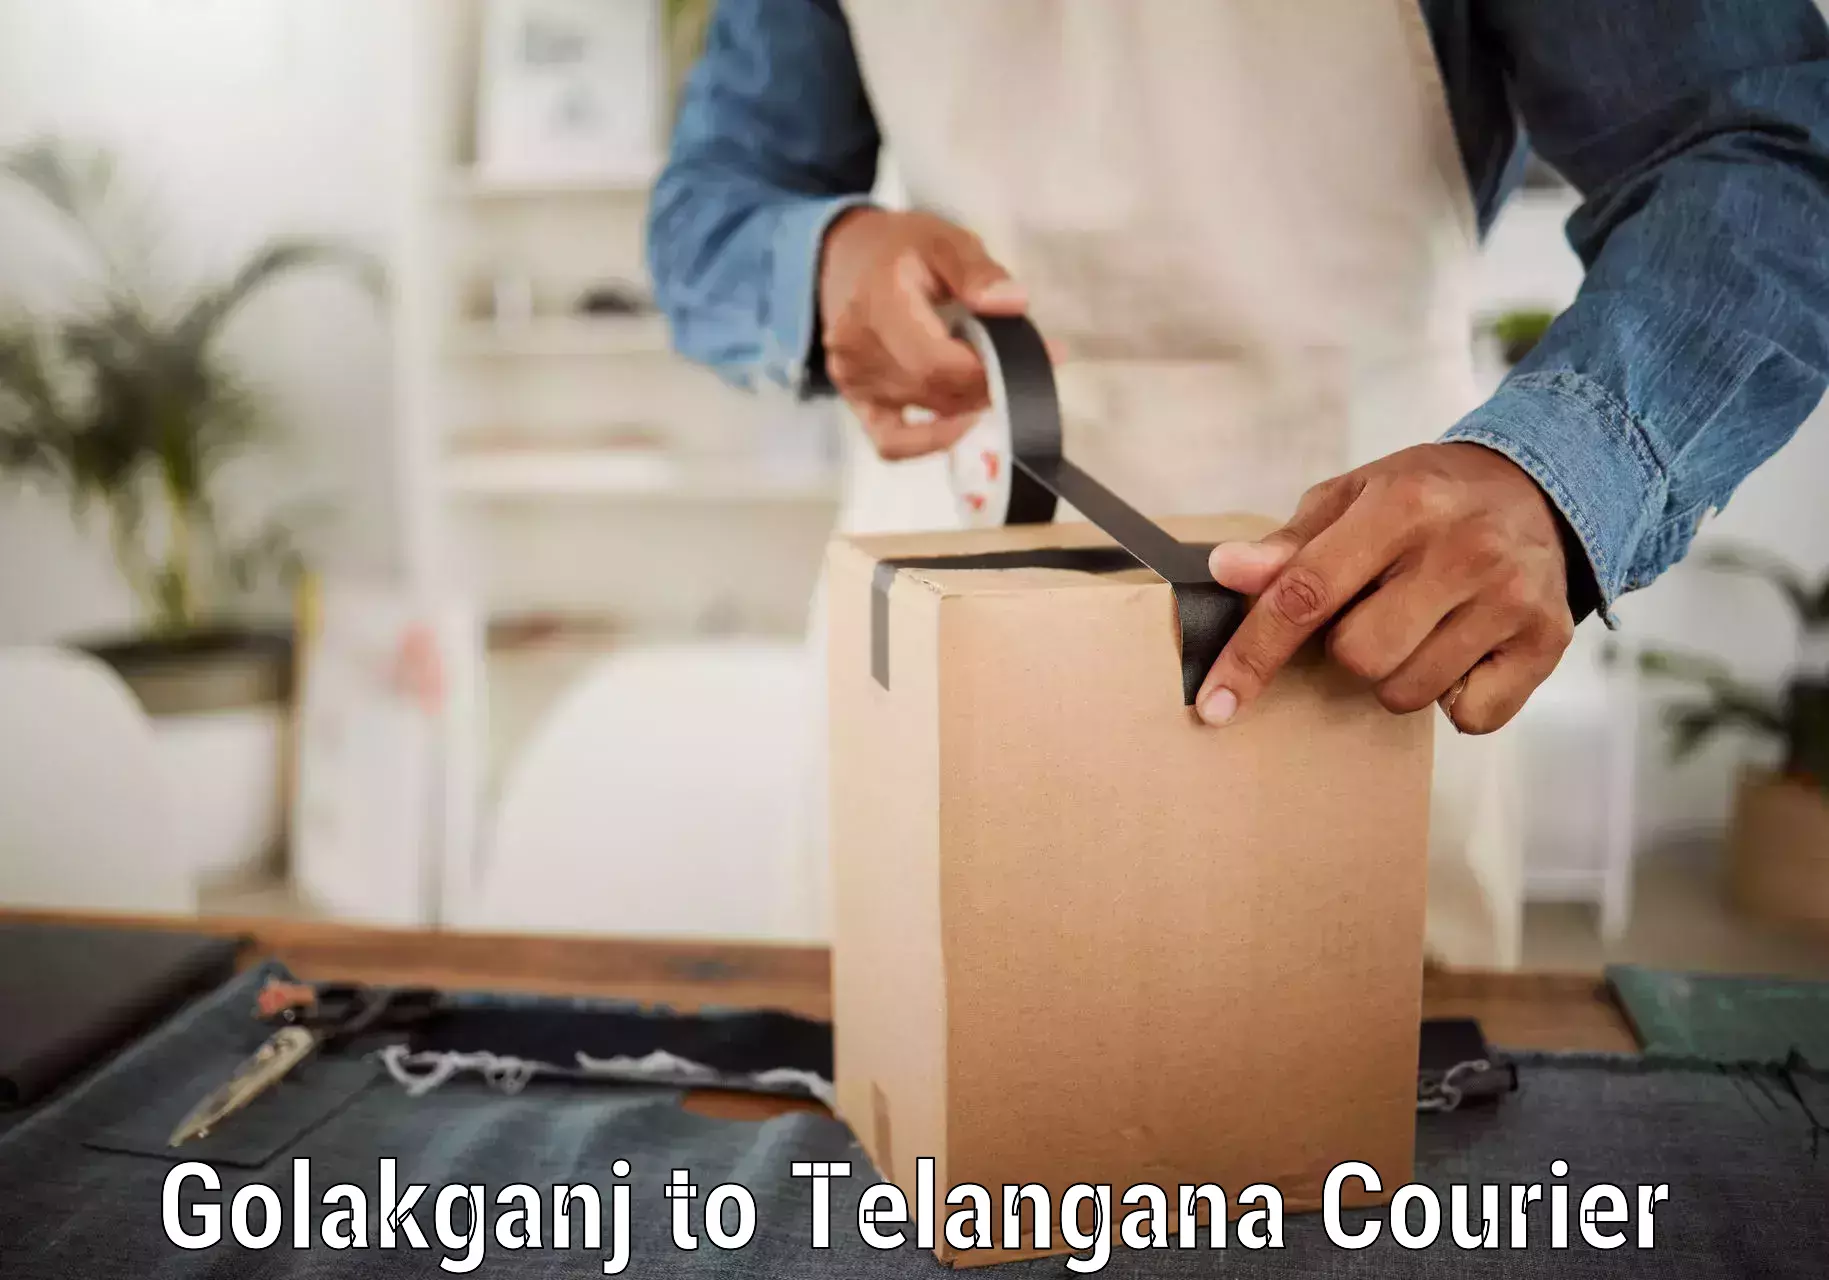 Reliable parcel services Golakganj to Gangadhara